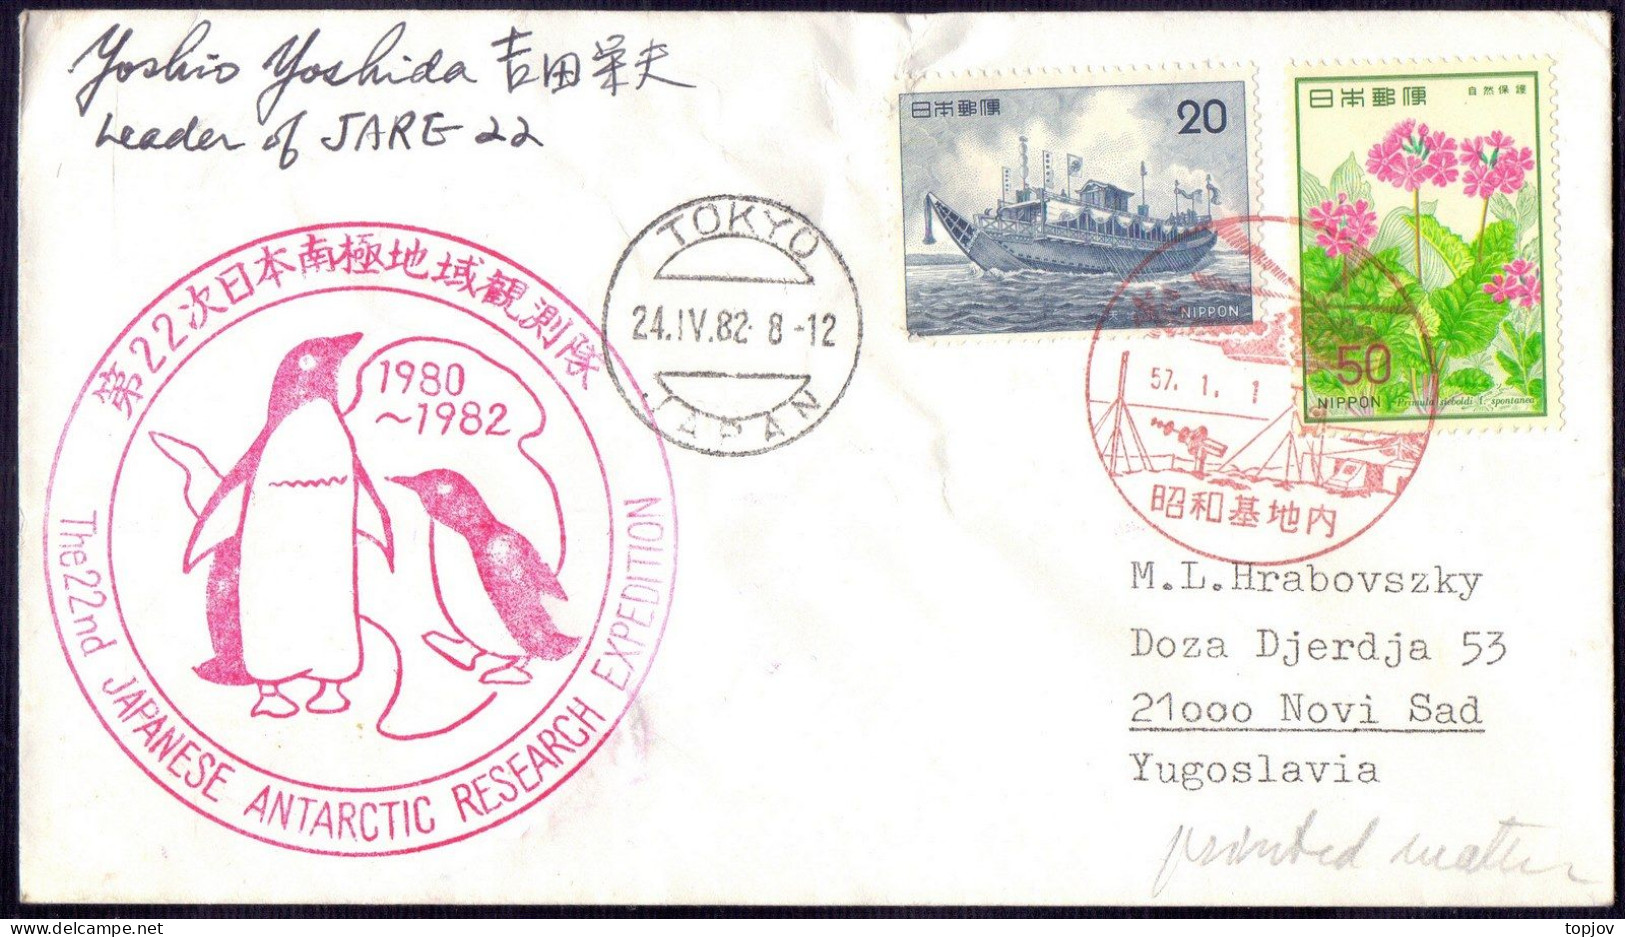 JAPAN - NIPPON - JAPANESE ANTARCTIC RESEARCH EXPEDITION - 1982 - Antarctic Expeditions